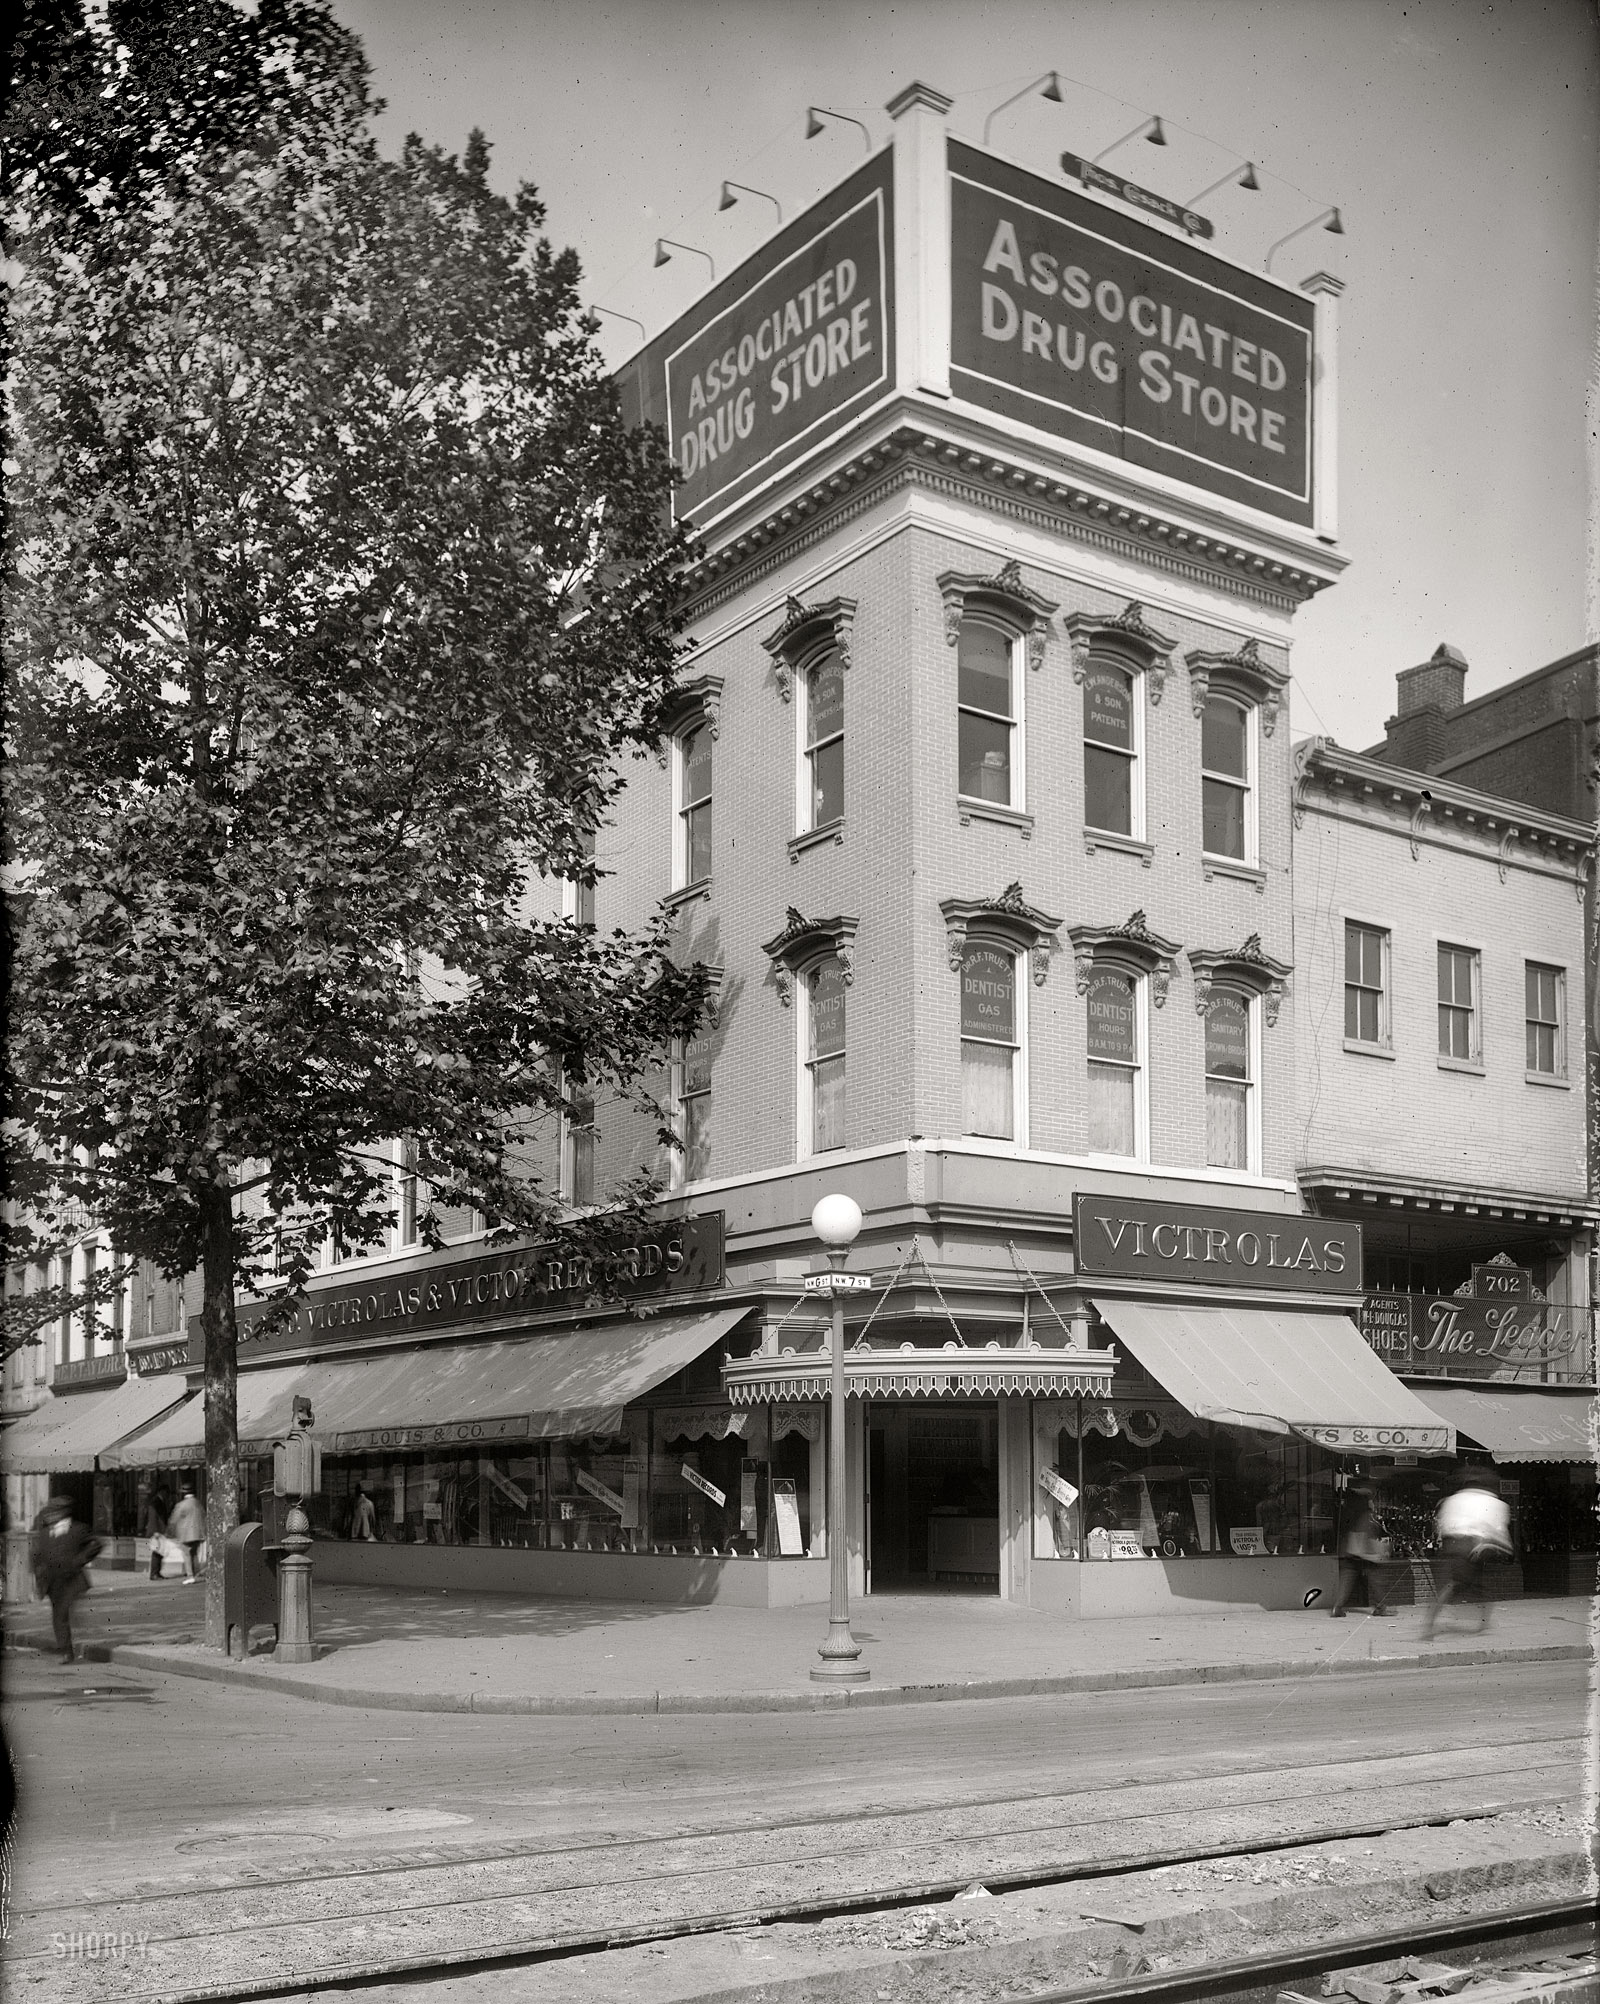 Washington, D.C., circa 1921. "Louis & Co., Seventh and G." A convenient grouping of Victrolas, painless dentistry and patent advice. View full size.